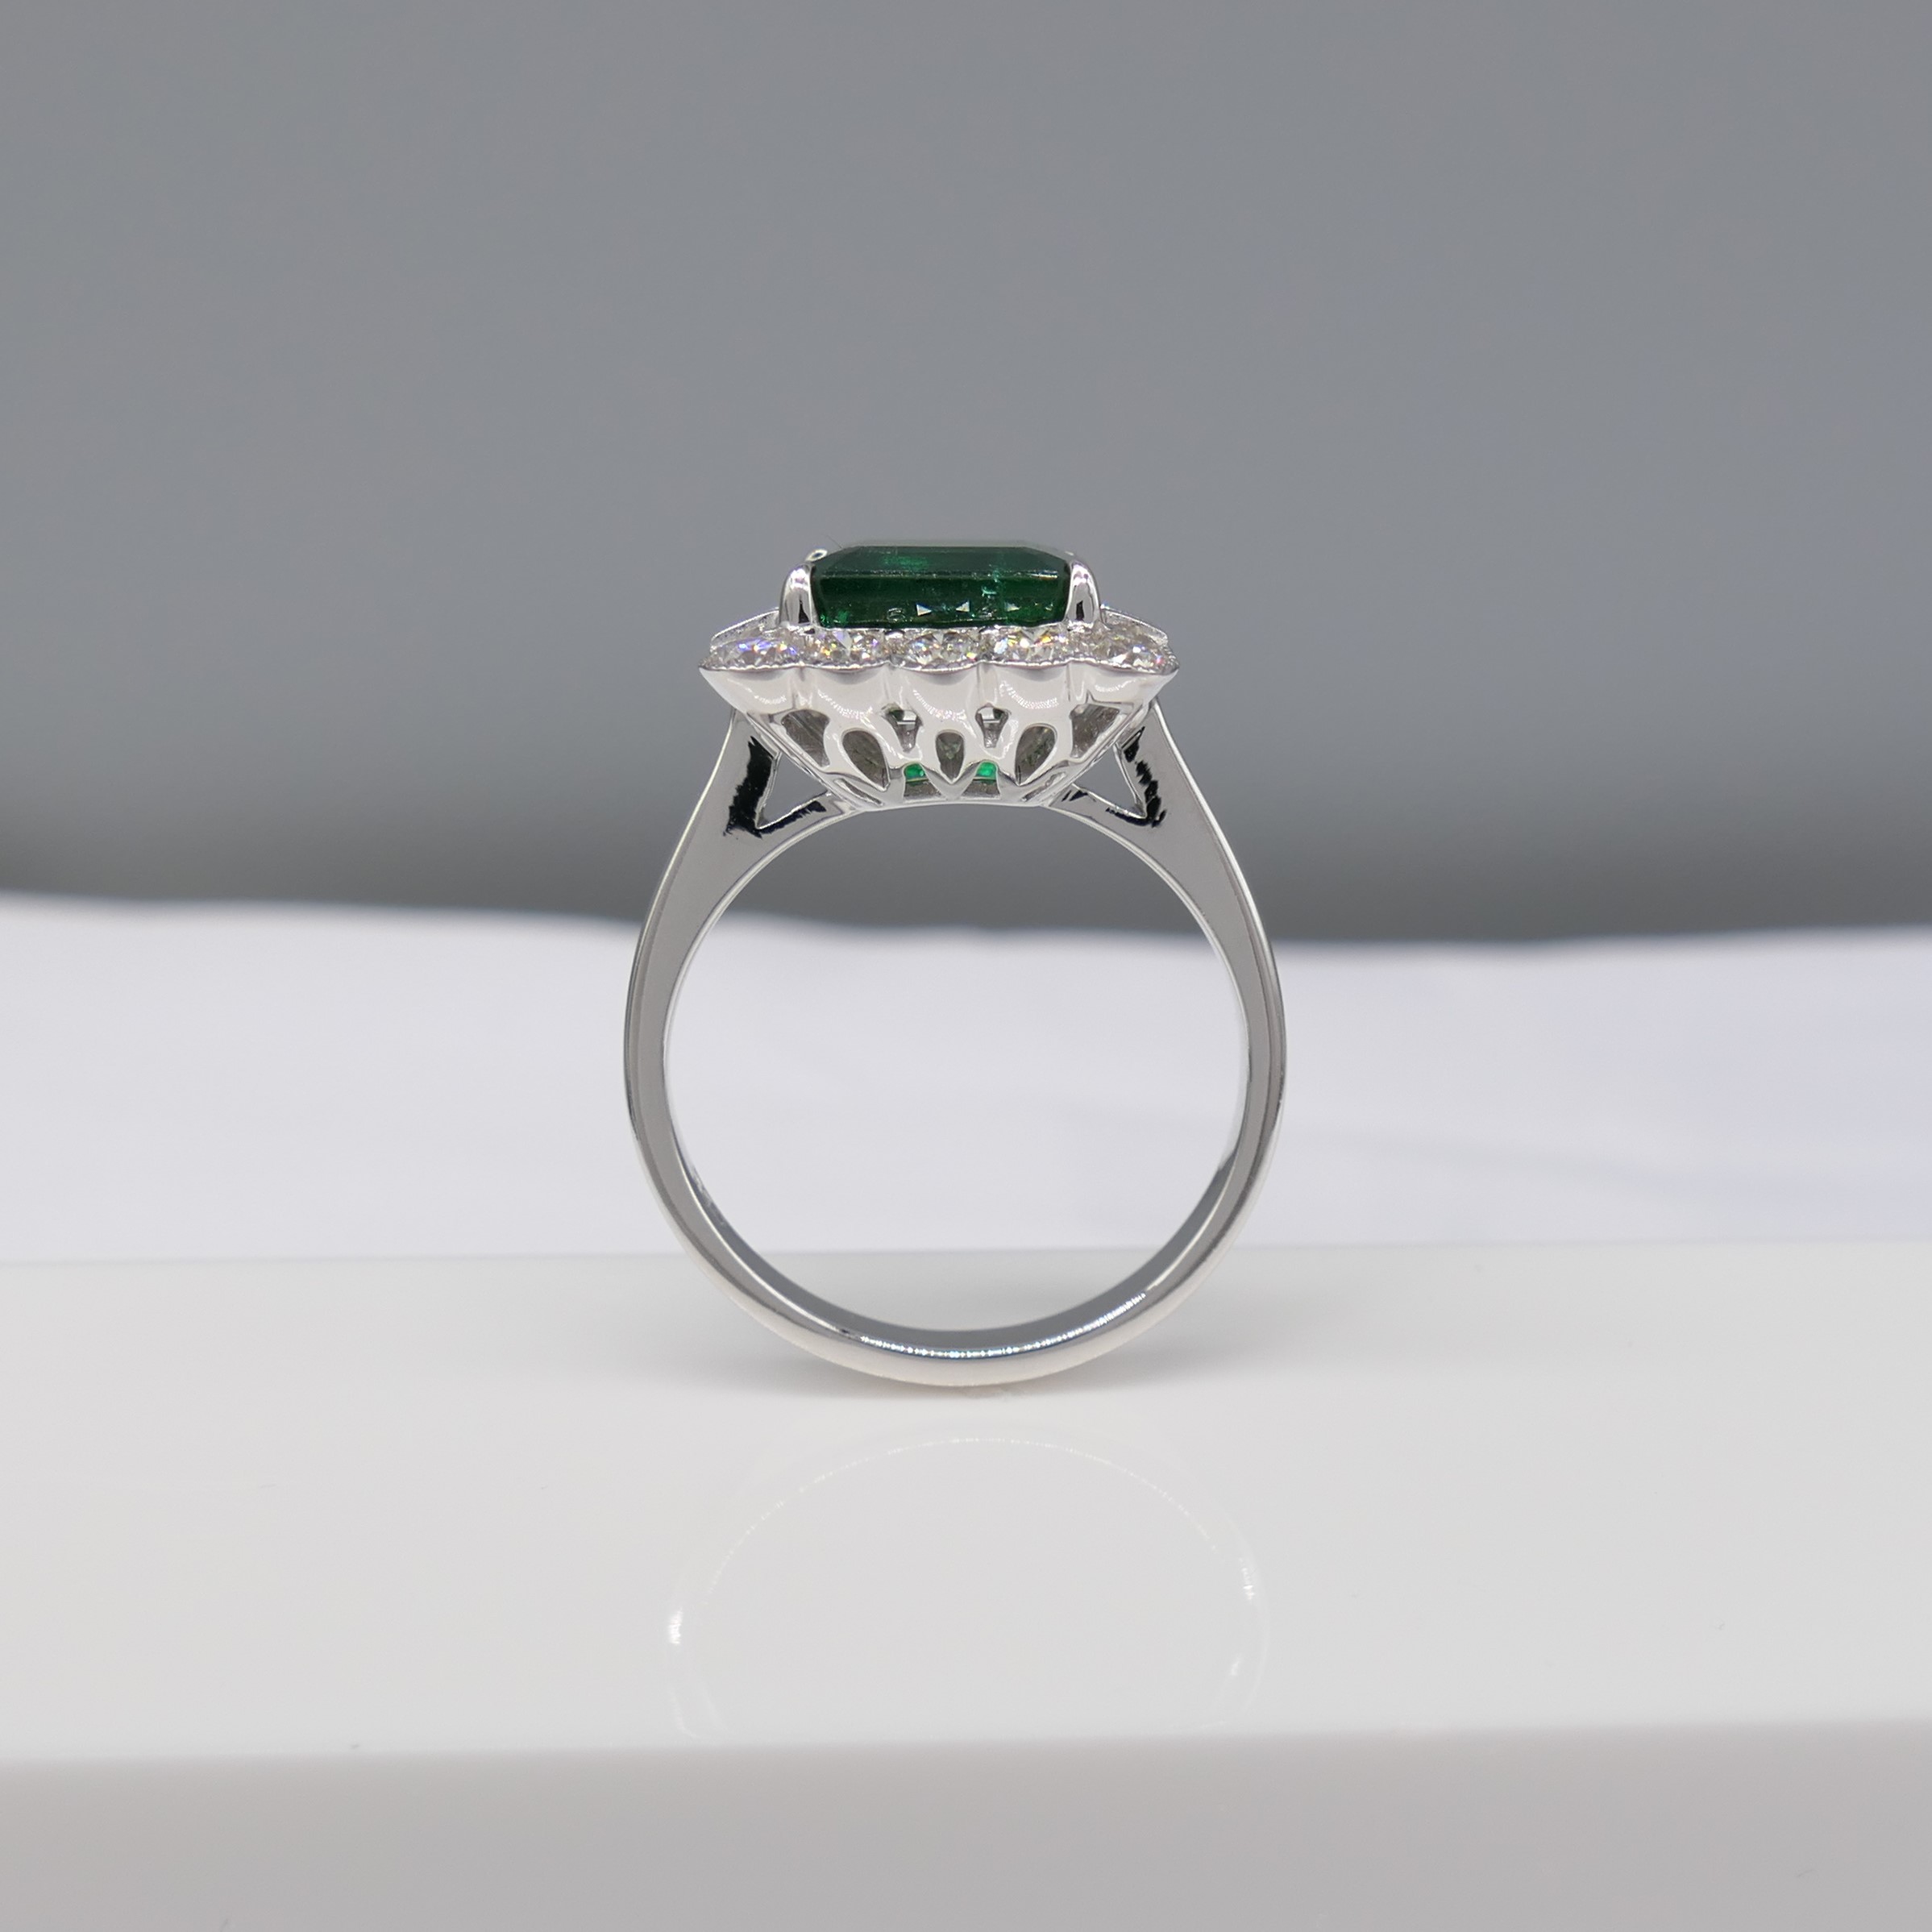 18ct White Gold Cocktail Ring Set With A Large Emerald and Diamonds - Image 5 of 7